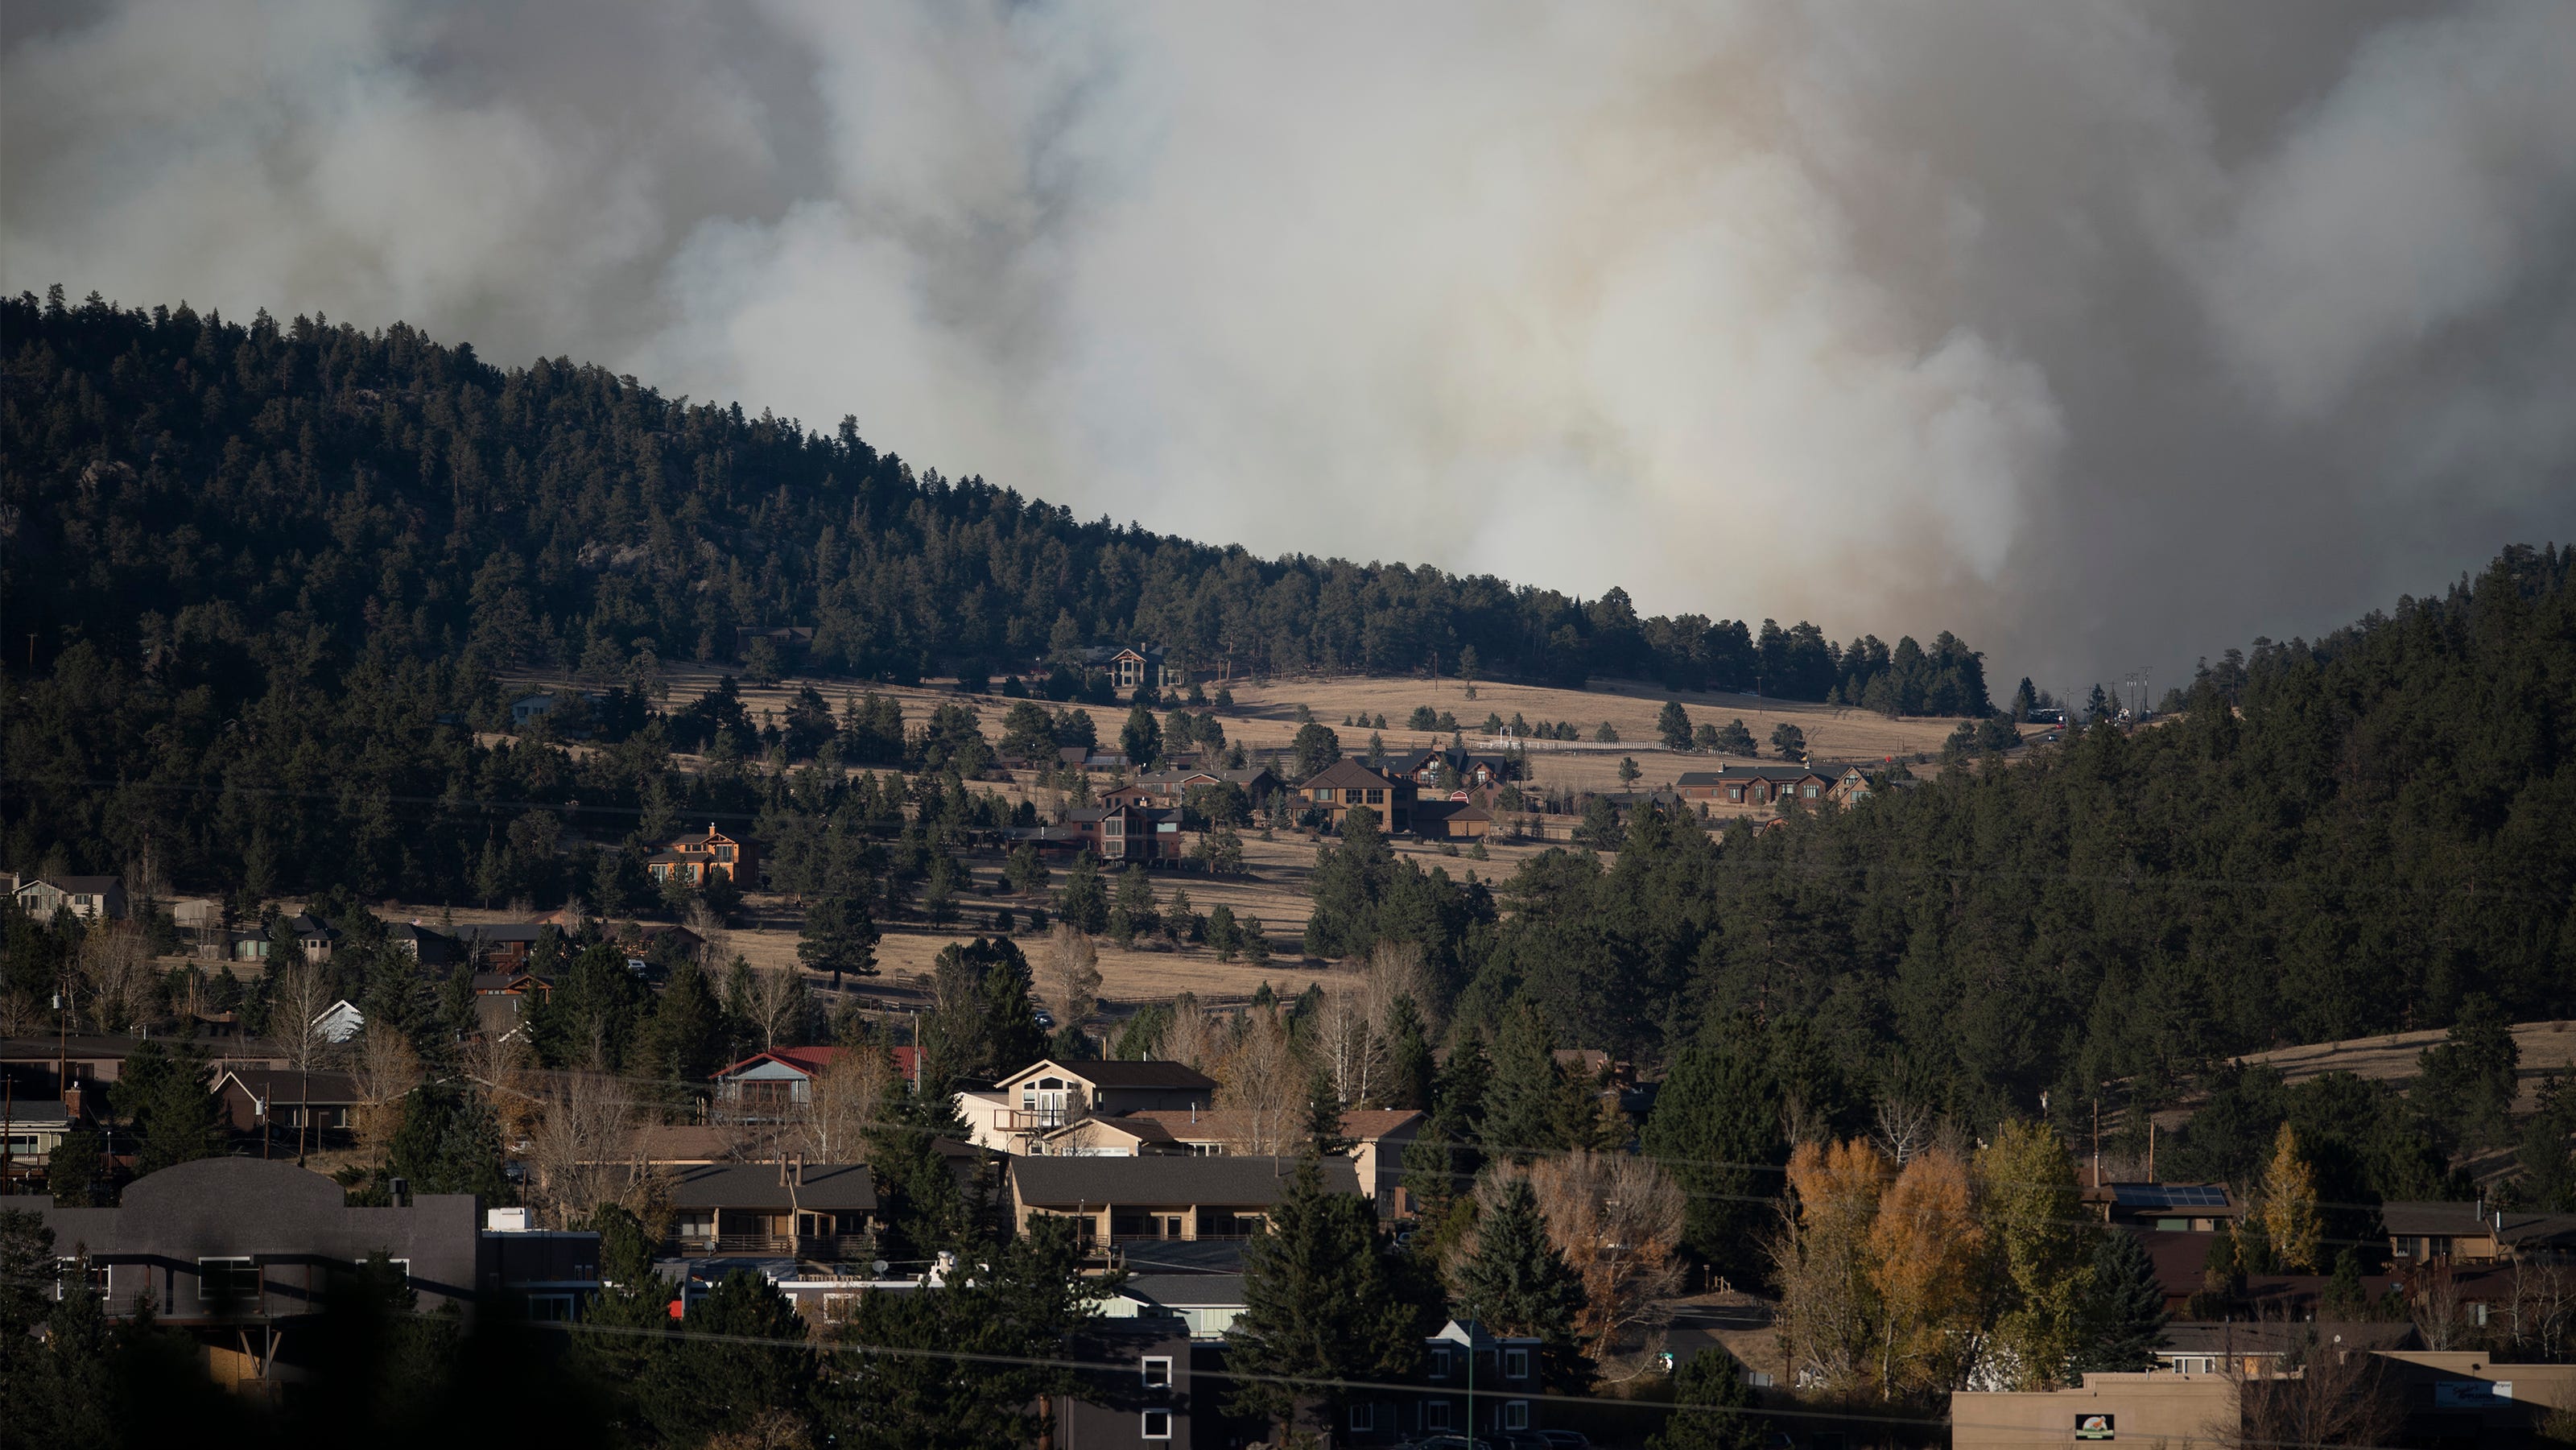 Cameron Peak Fire Colorado Largest Wildfire Continues To Burn Photos 